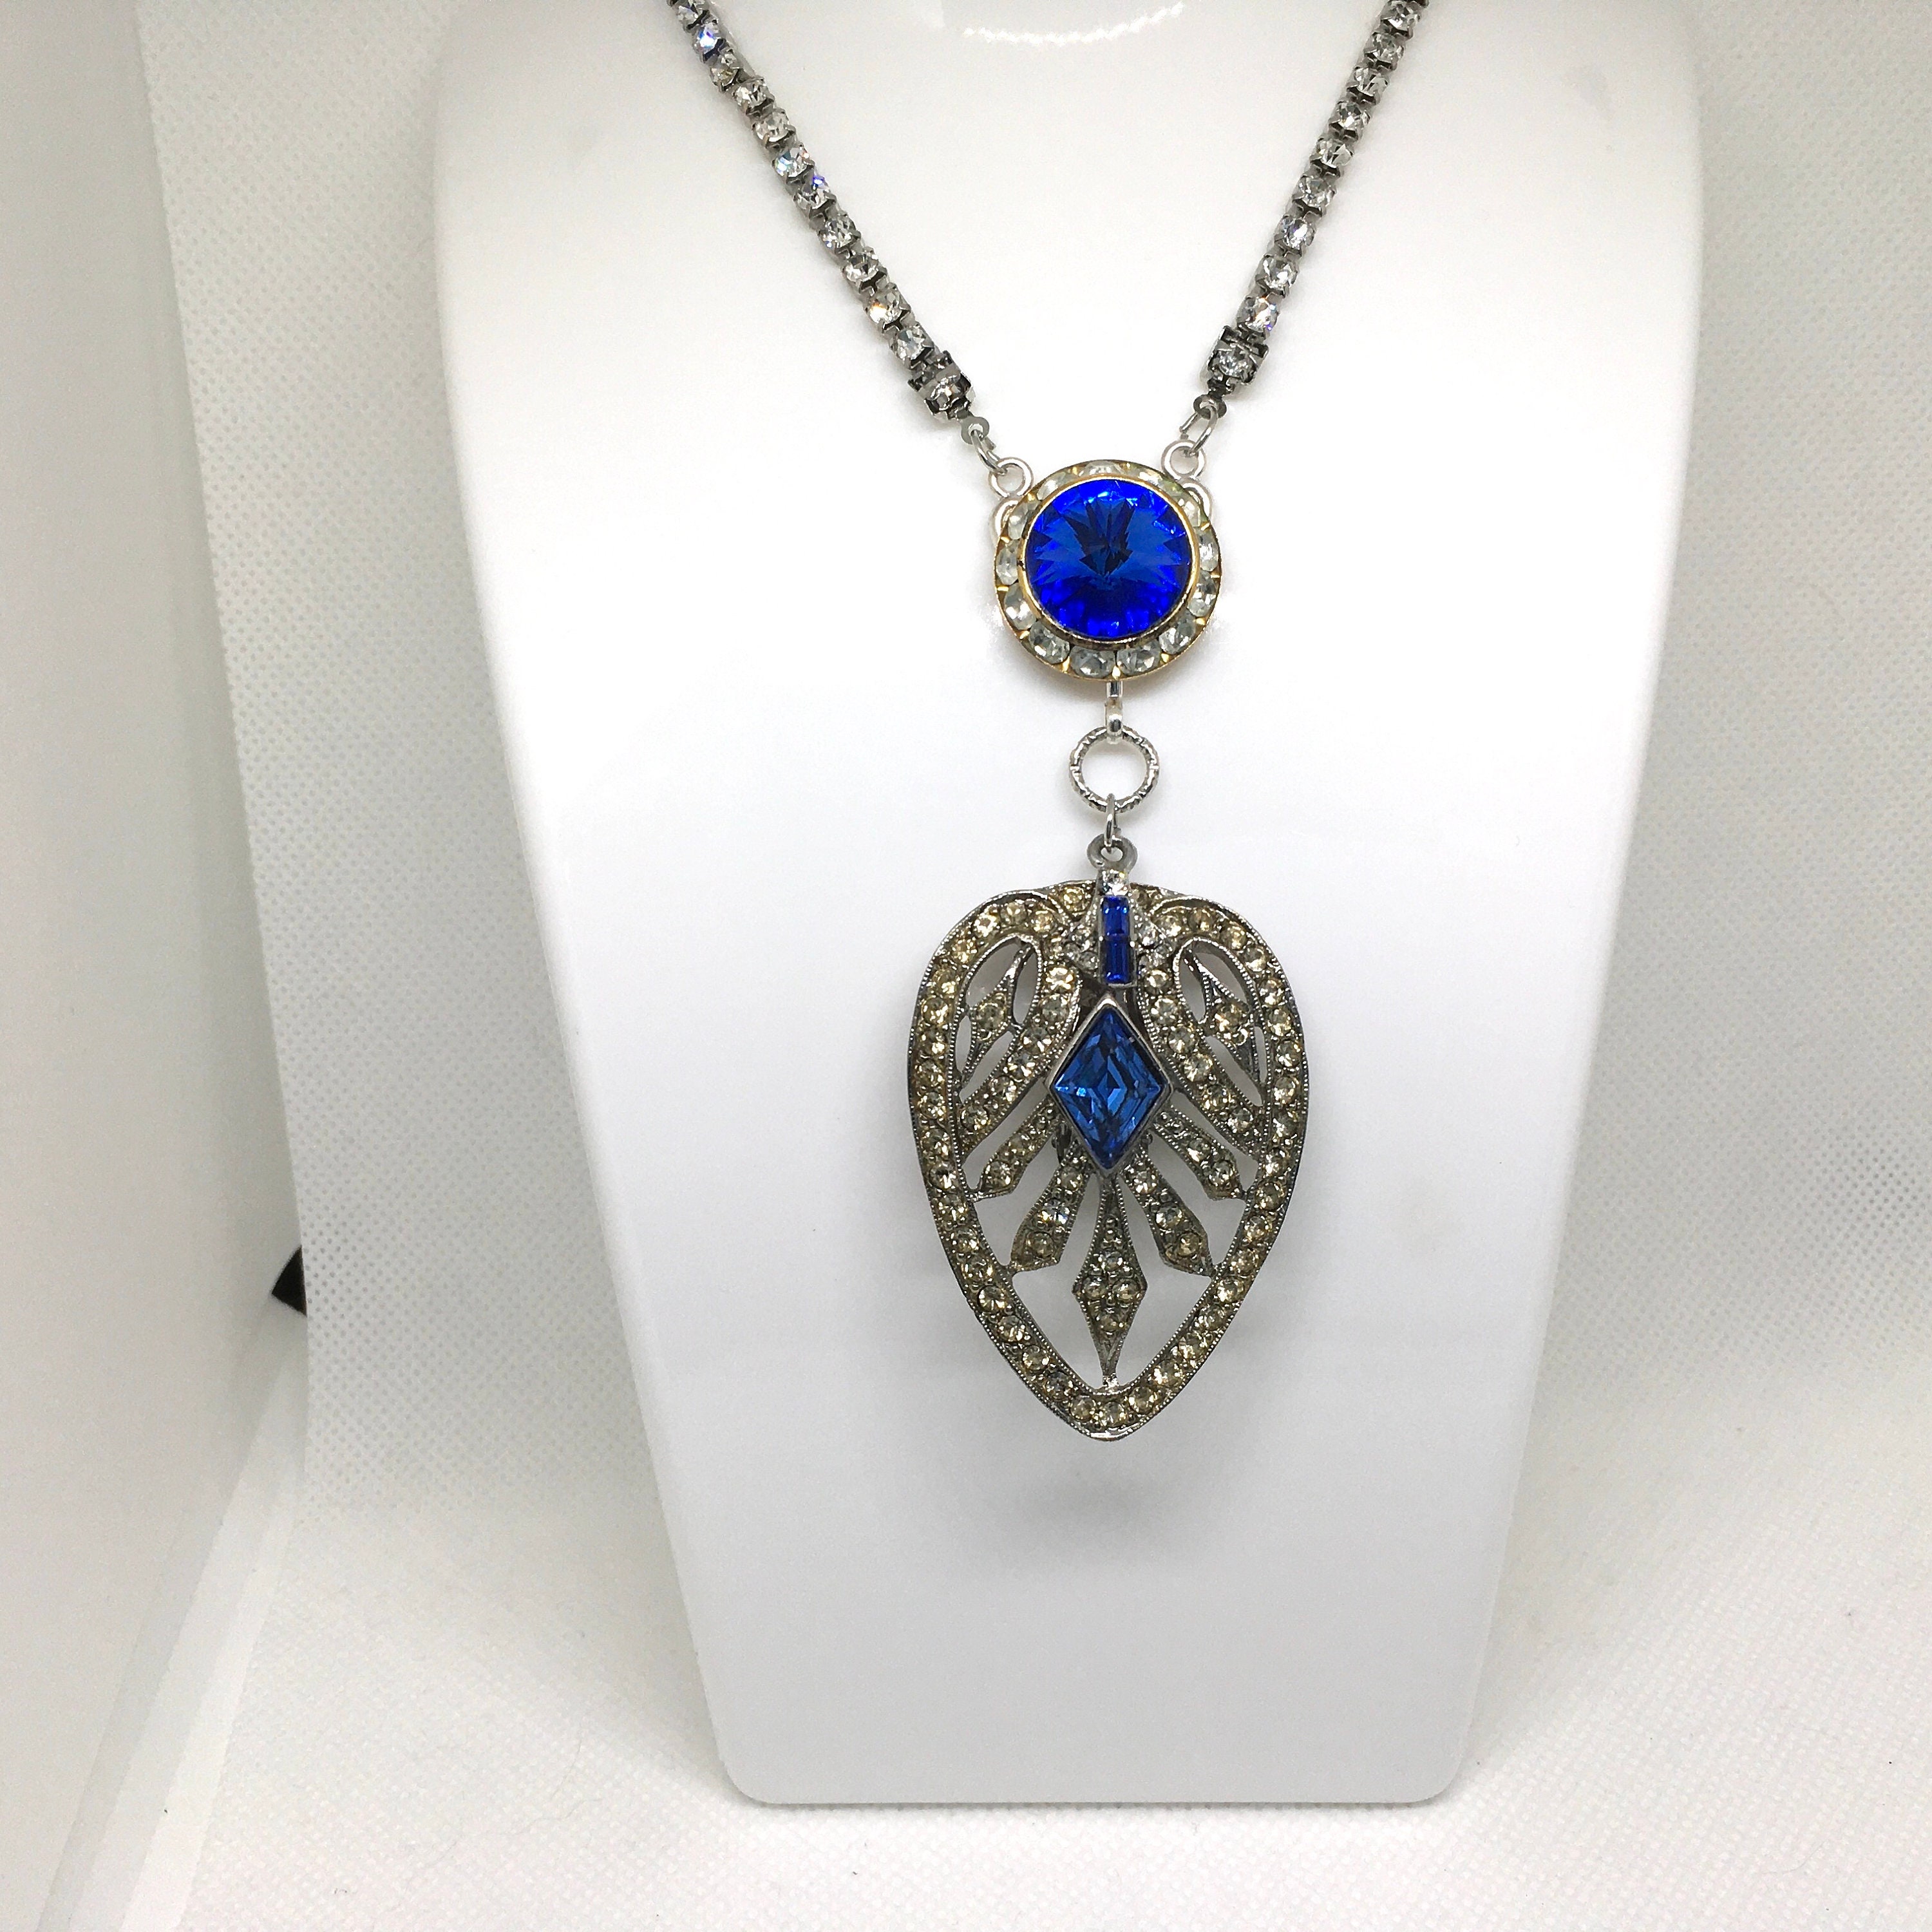 Elegant Deep Blue and Bright Blue Rhinestone Necklace on a Silver… – Second  Wind Vintage